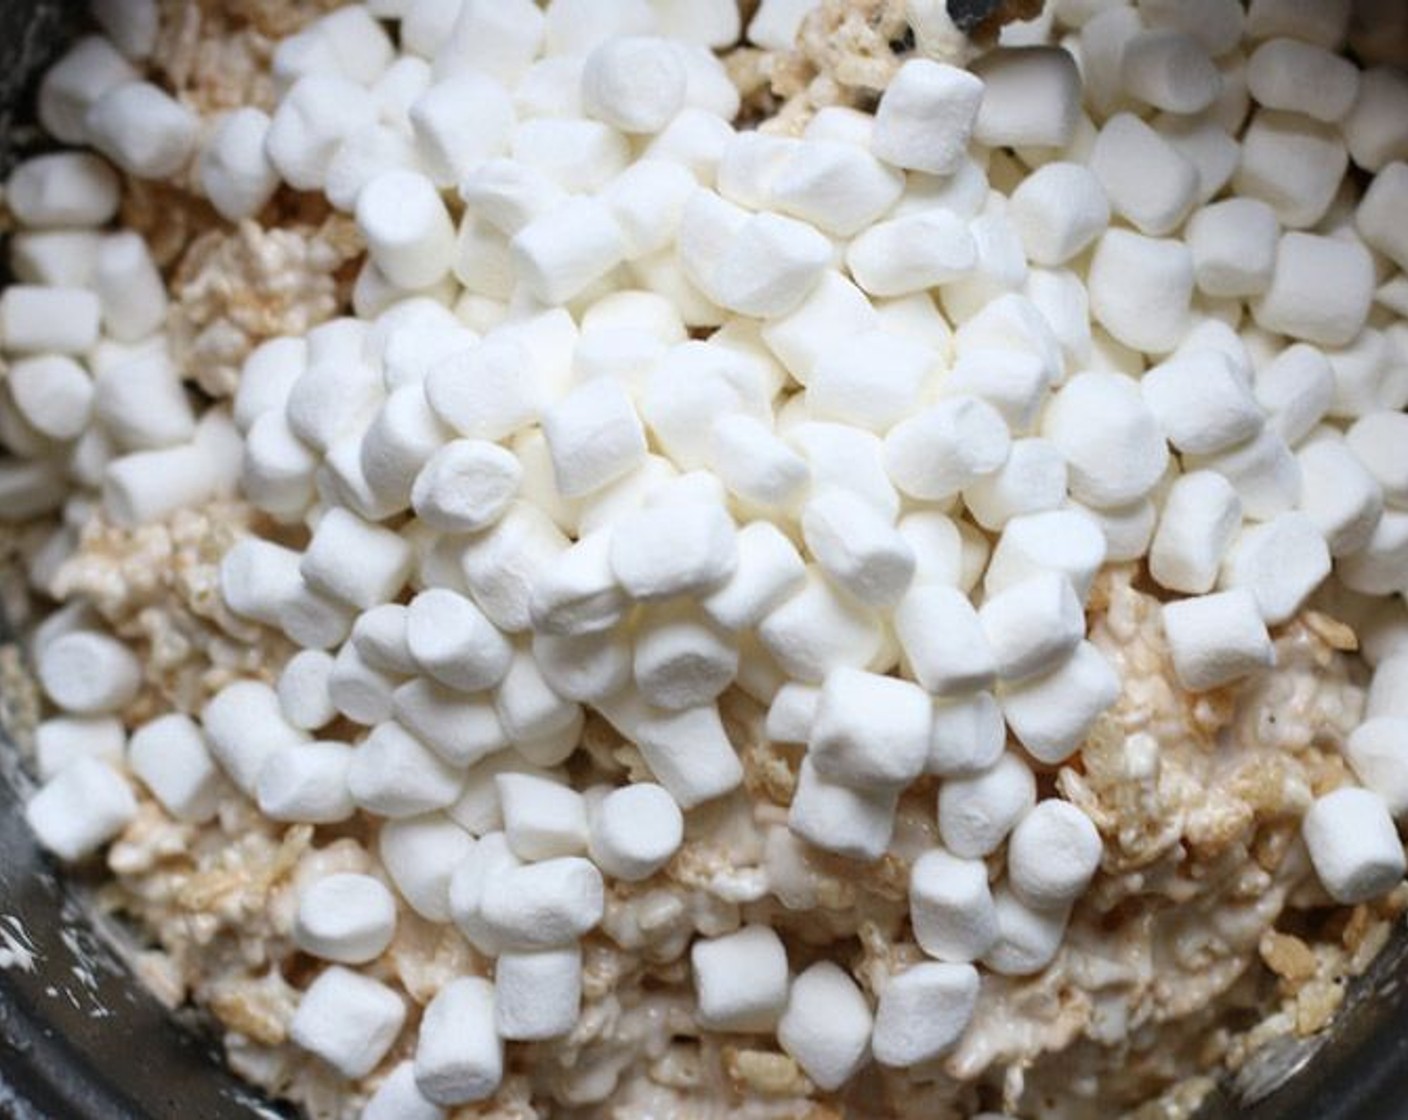 step 3 With a wooden spoon, stir in the Rice Krispies® Cereal (12 cups) and mix until the cereal is evenly coated. Then stir in the remaining Mini Marshmallows (4 cups).